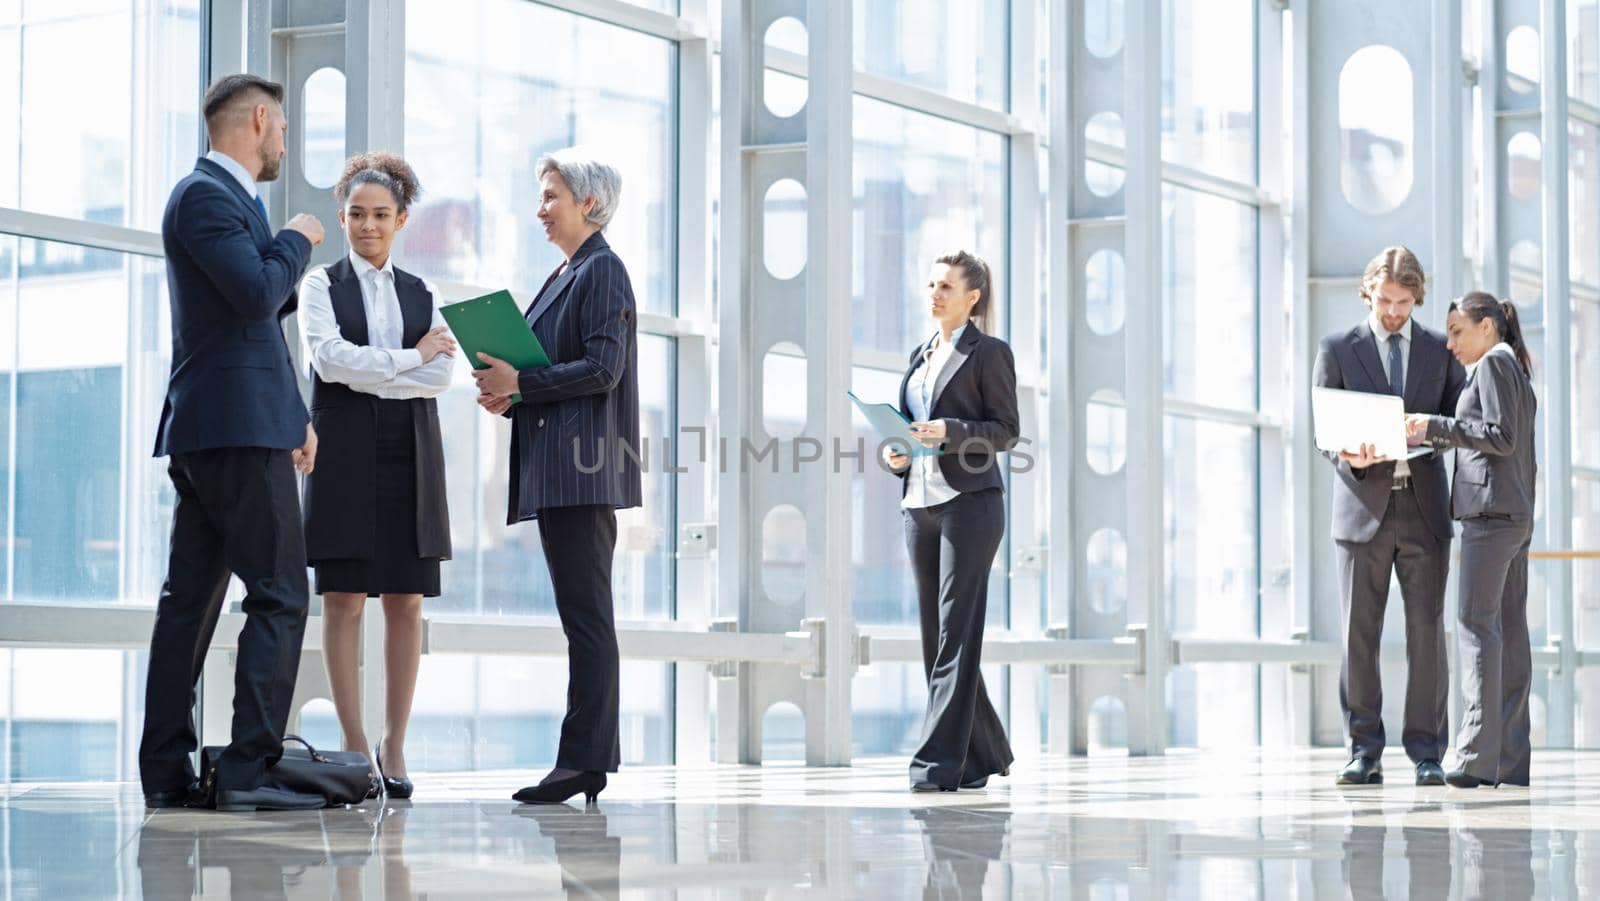 Business peopl talking about documents in office lobby of modern building